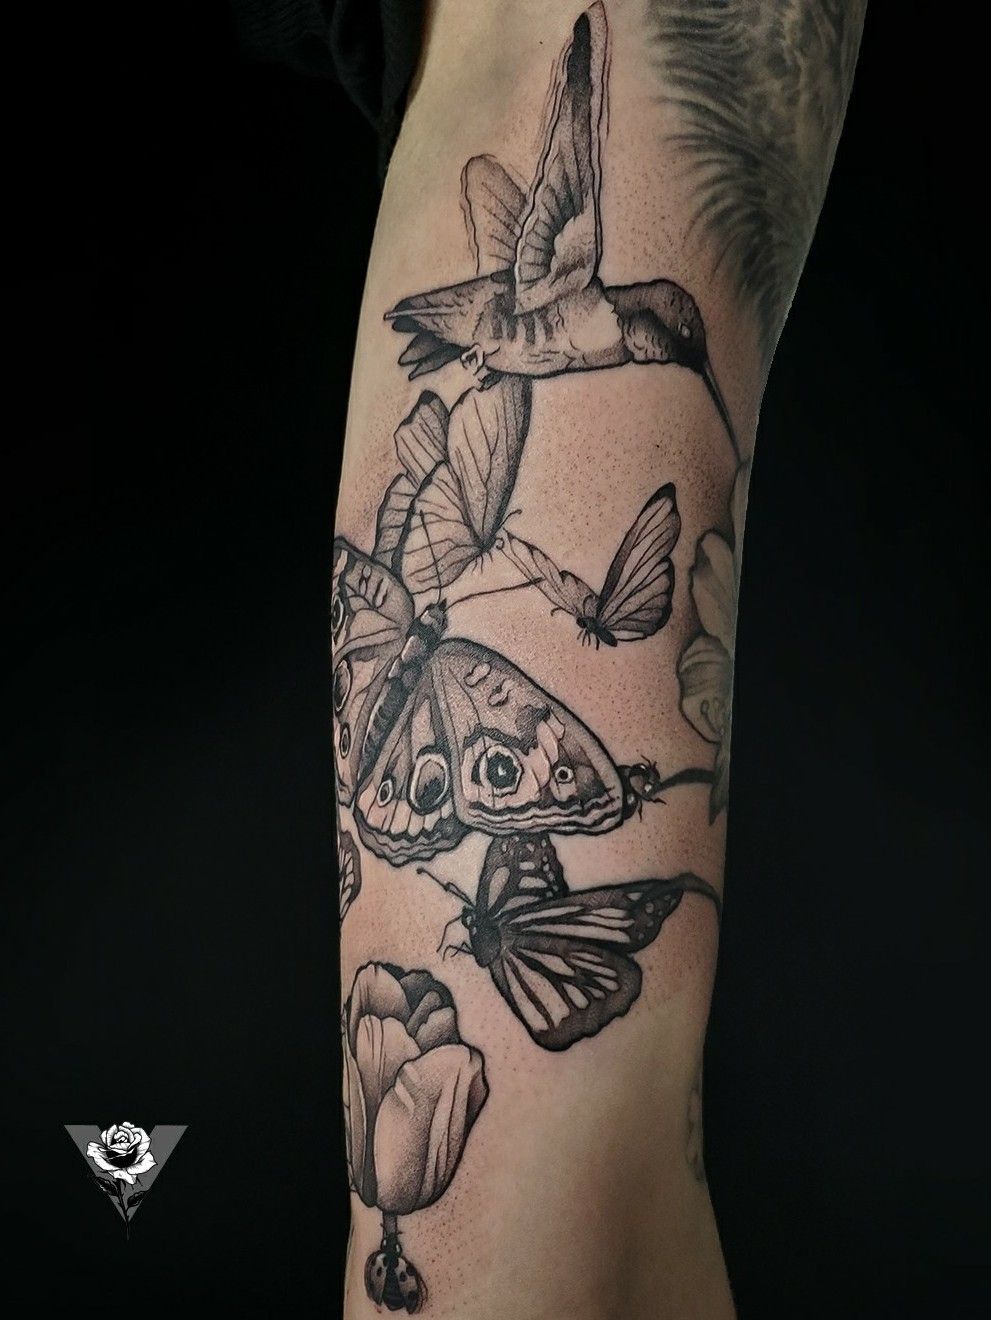 clearwing hummingbird moth on zzhannon under a healed apricot branch  thank you  teamgoldeniron torontotattoo tor  Tattoos Cool tattoos  Tattoo inspiration